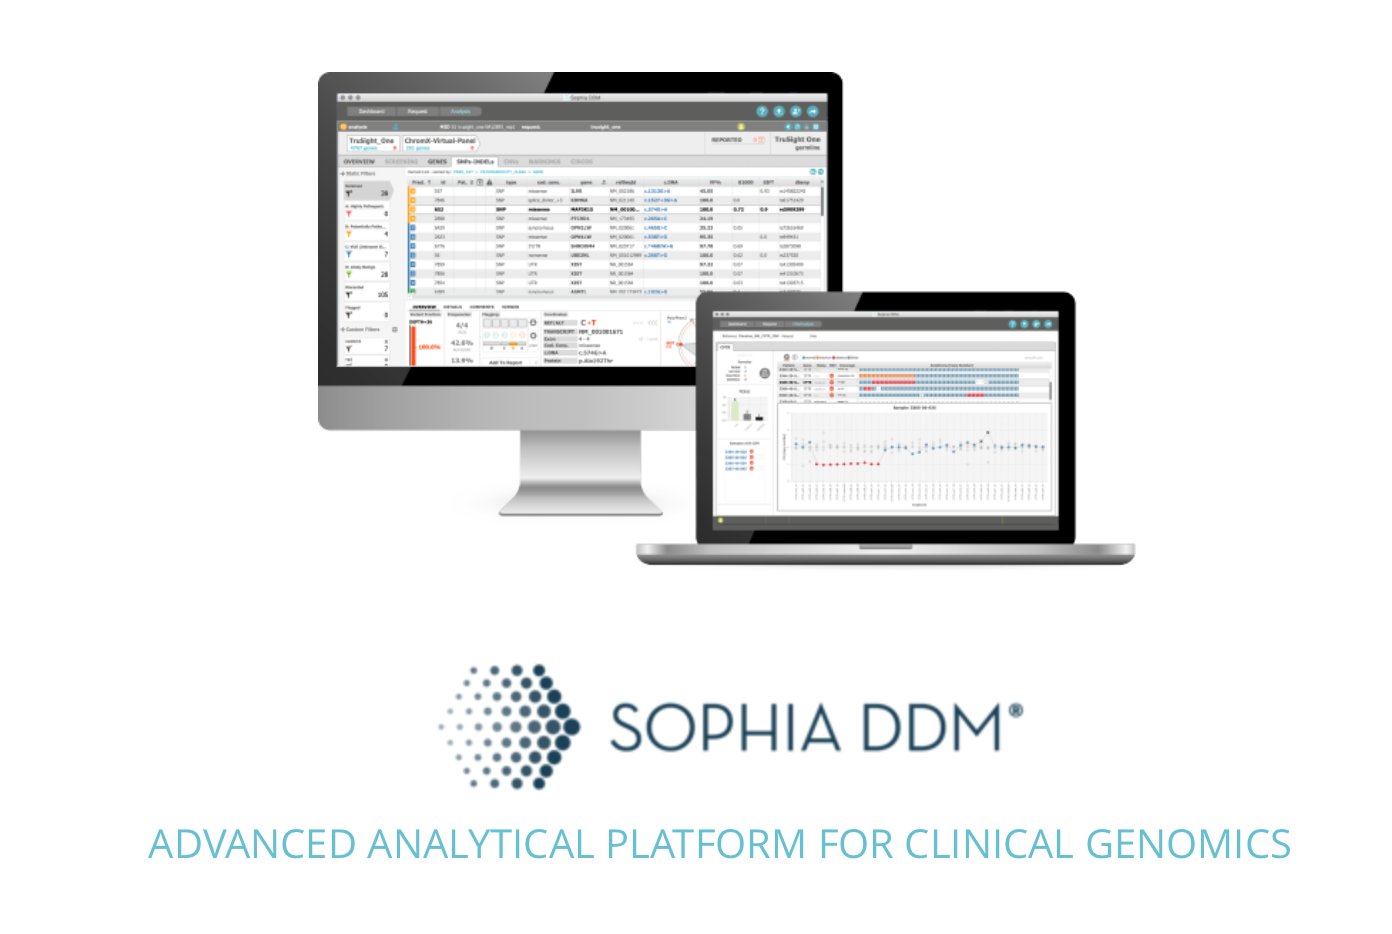 Sophia Genetics On Twitter Sophia Ddm Is The Platform Of Choice For Clinicians To Perform Routine Diagnostic Testing Https T Co Cdei8fmeuy